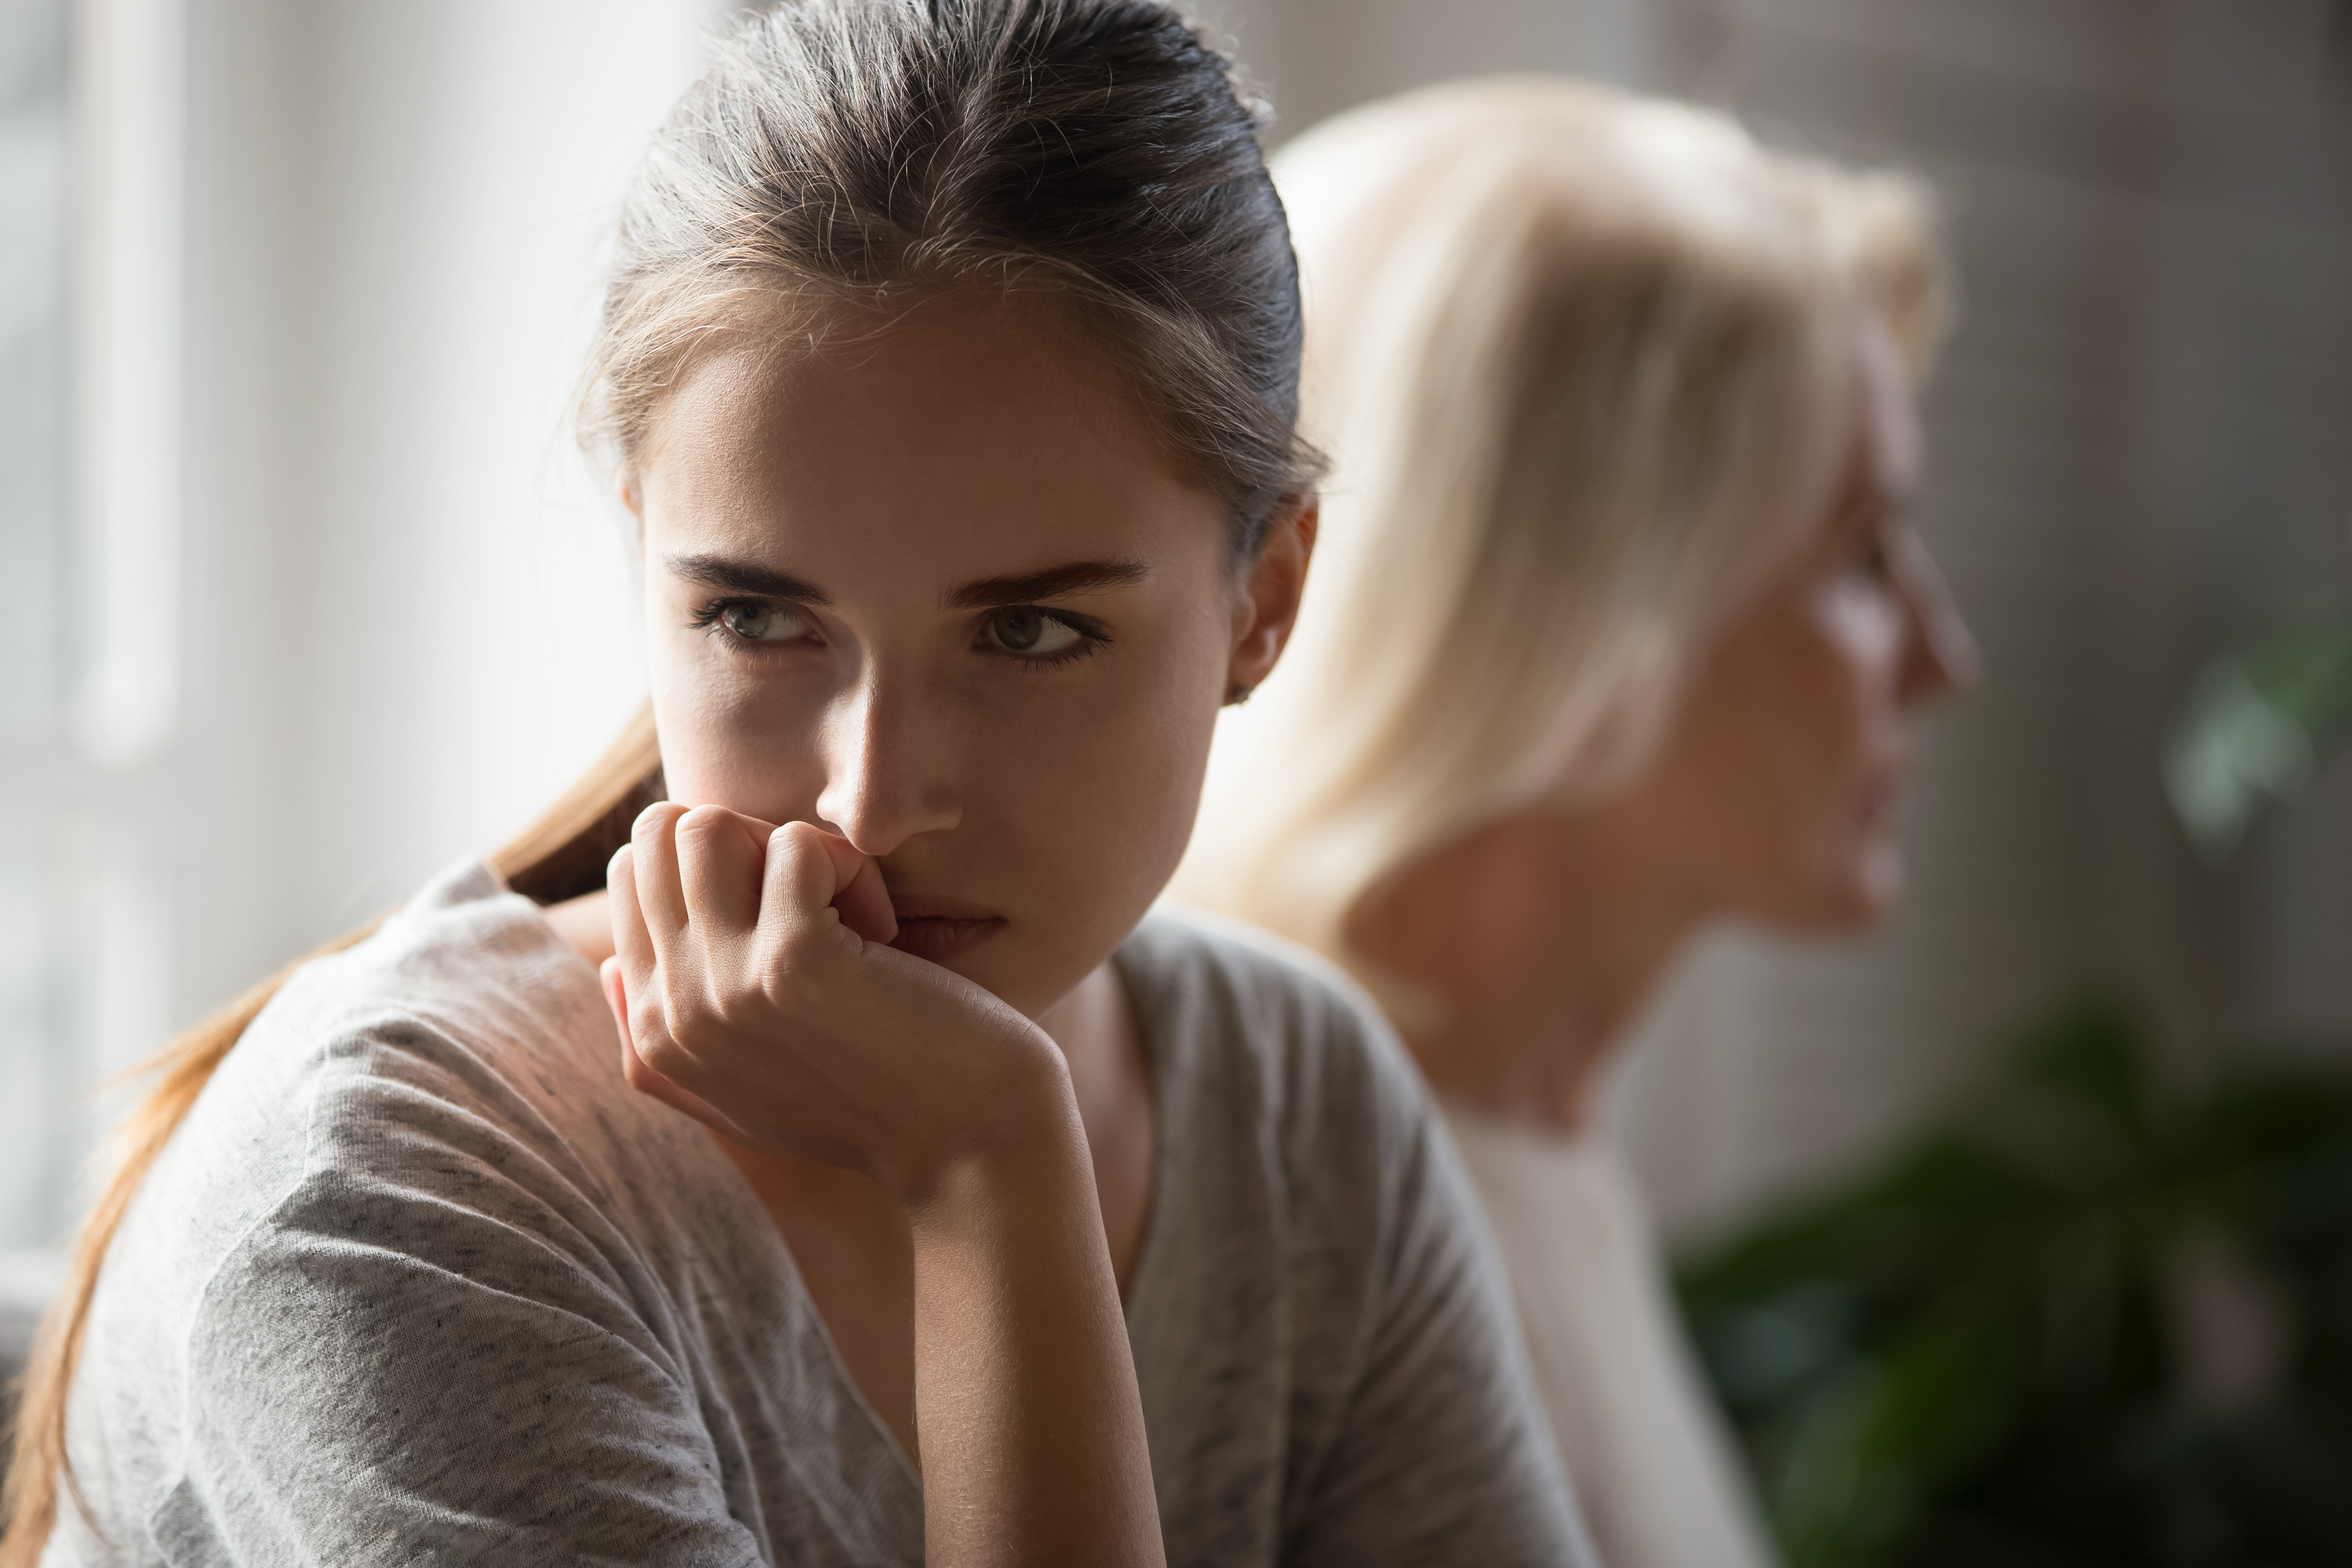 Stubborn mom and daughter avoid talking after conflict | Source: Getty Images